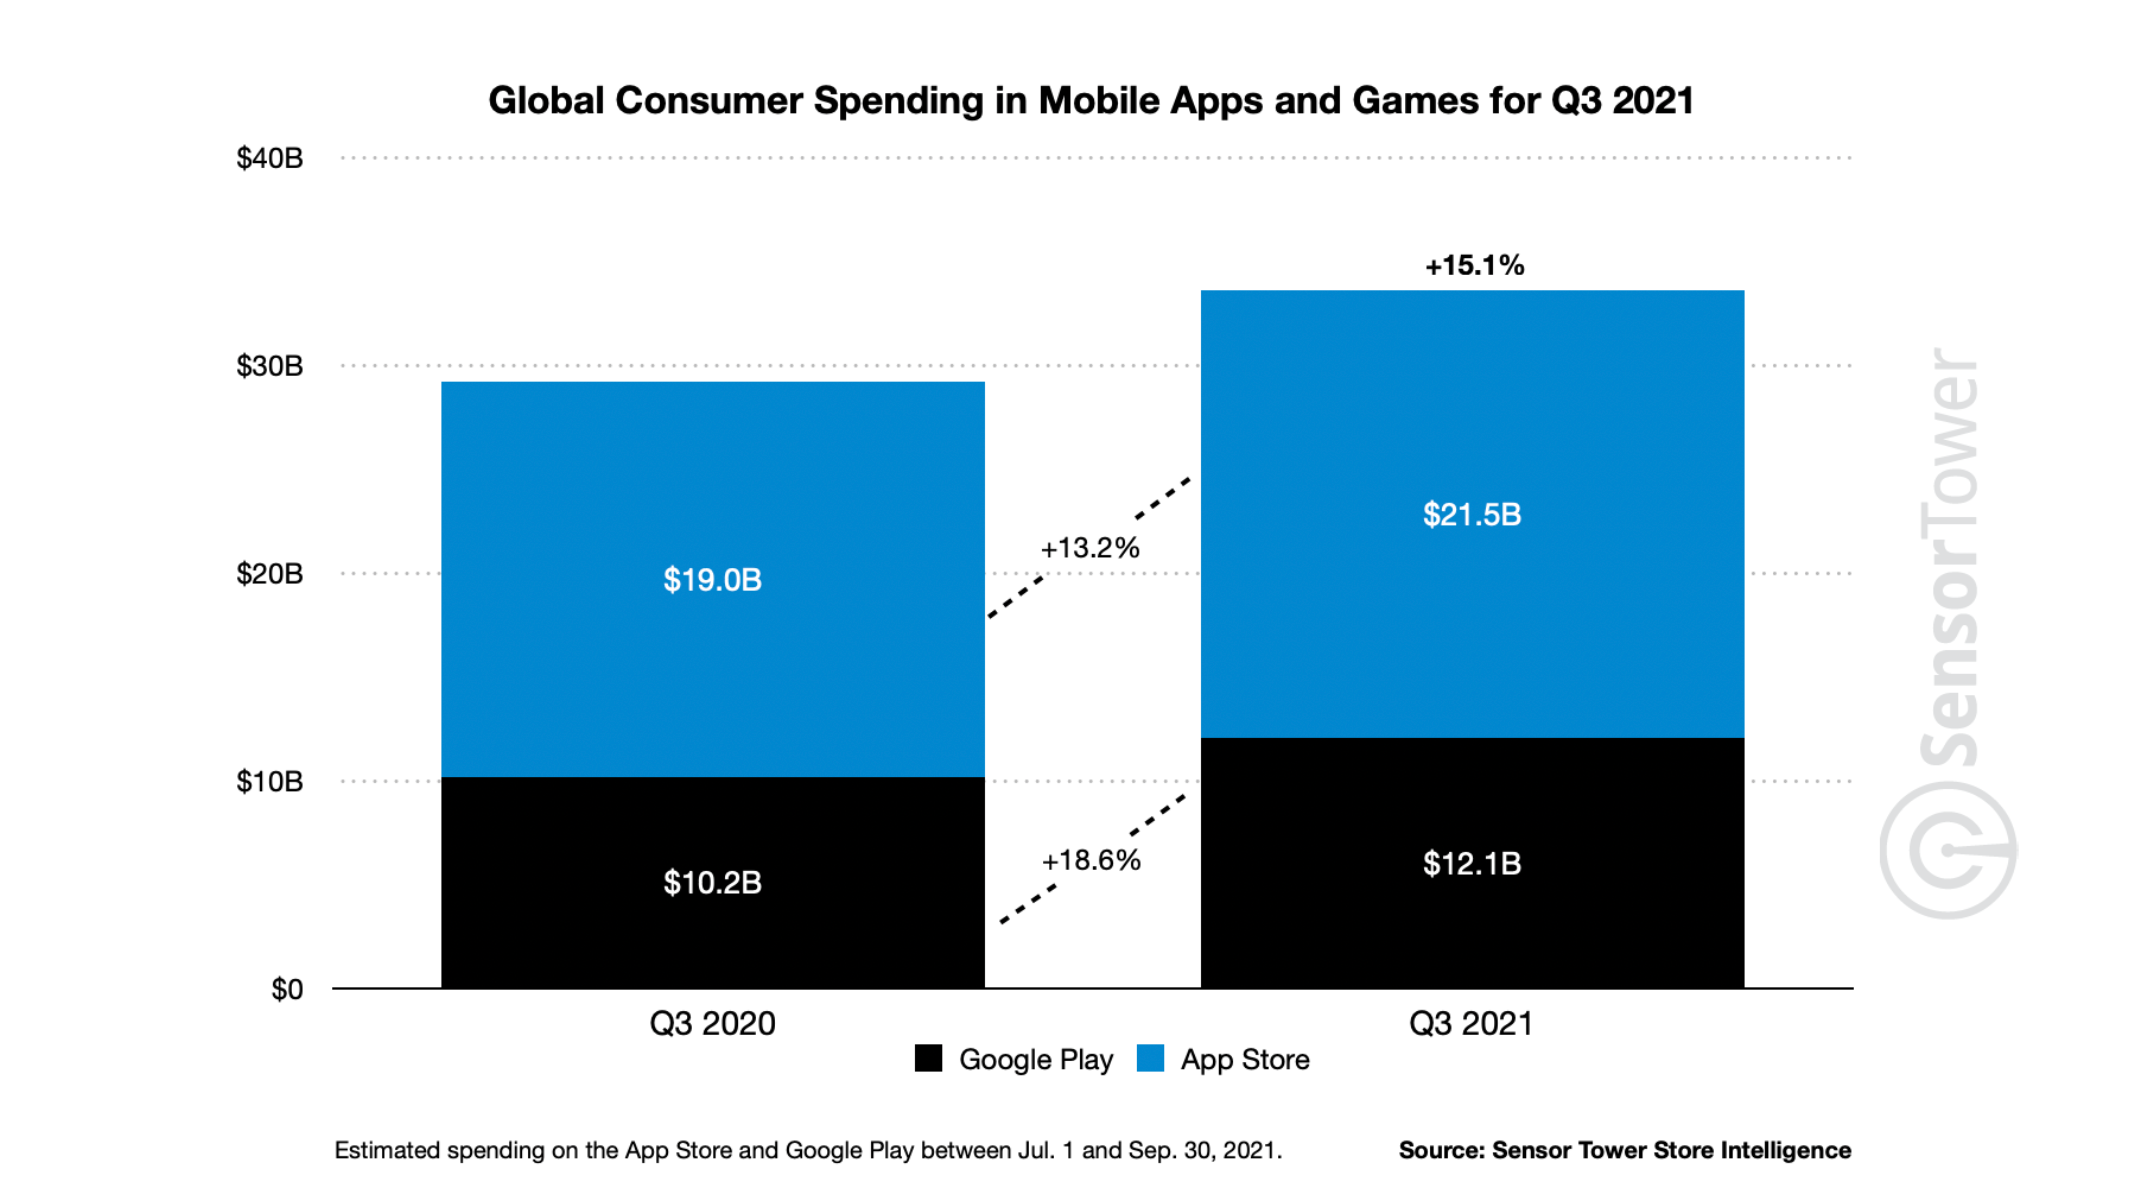 Estimated spending on Mobile Apps